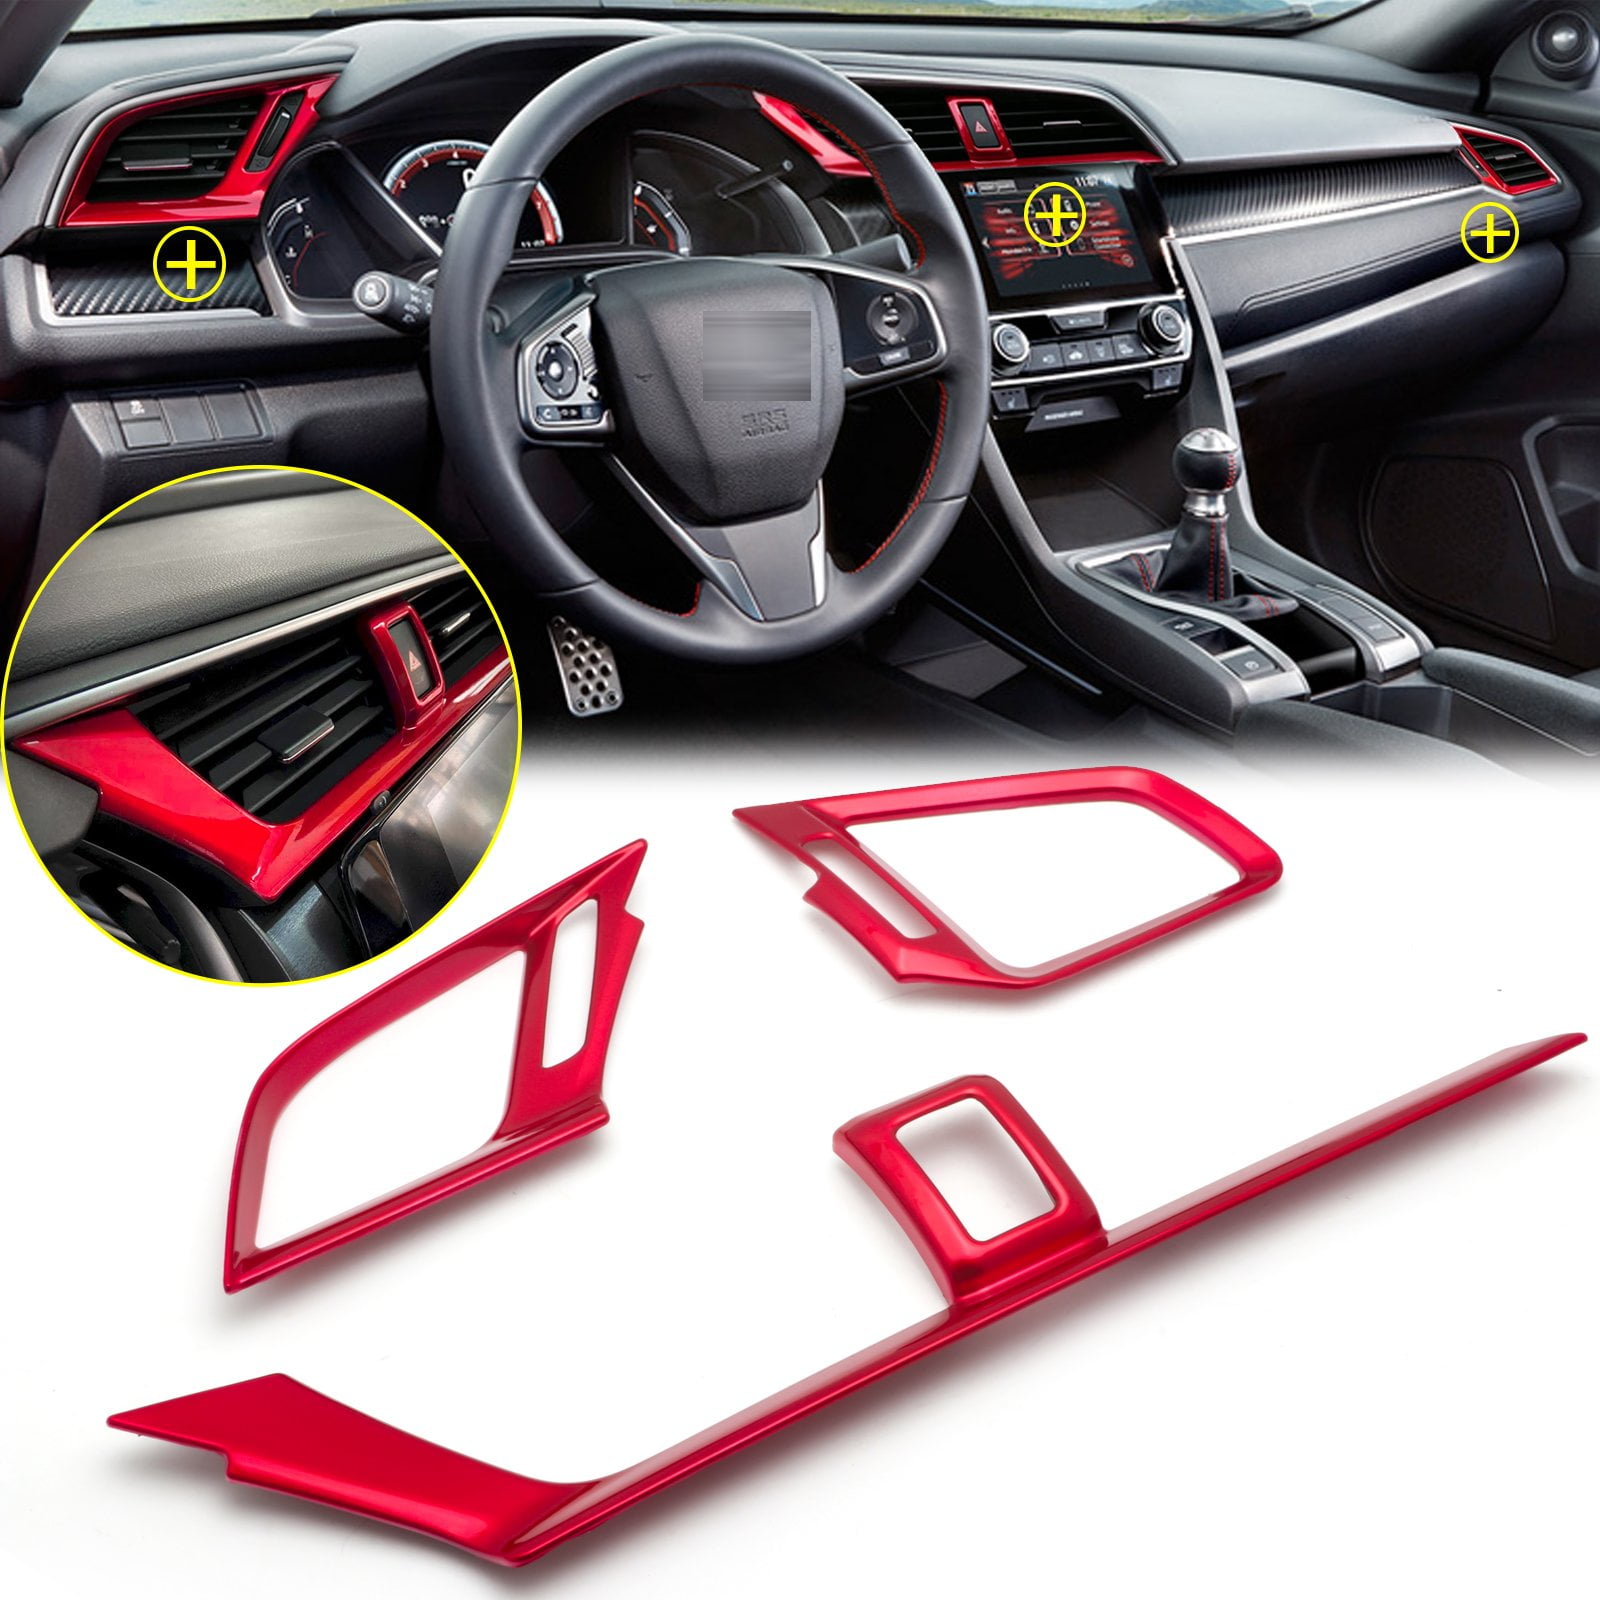 Xotic Tech RED Interior Front Dashboard AC Air Vent Outlet Cover Trim Frame Panel Decoration 3pcs kit for Honda Civic 10th Gen 2016 2017 2018 2019 2020 